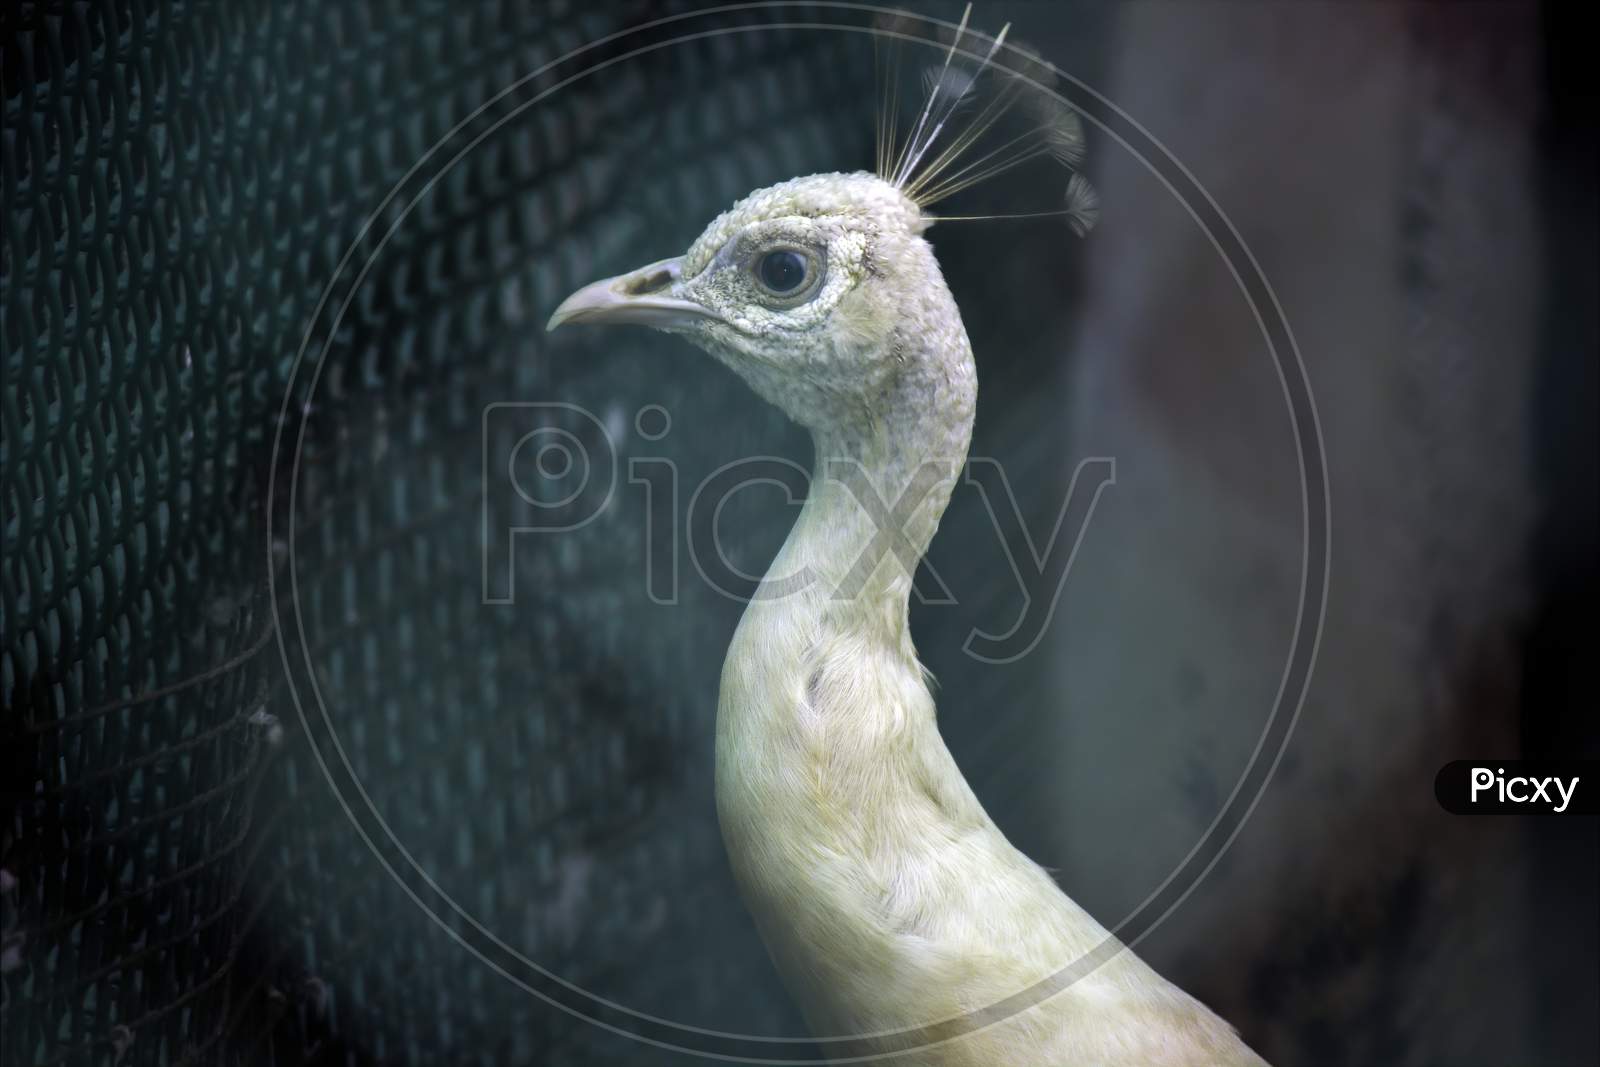 A Head Shot Of White Peafowl In The Krakow City Zoo, Located In Poland - Europe